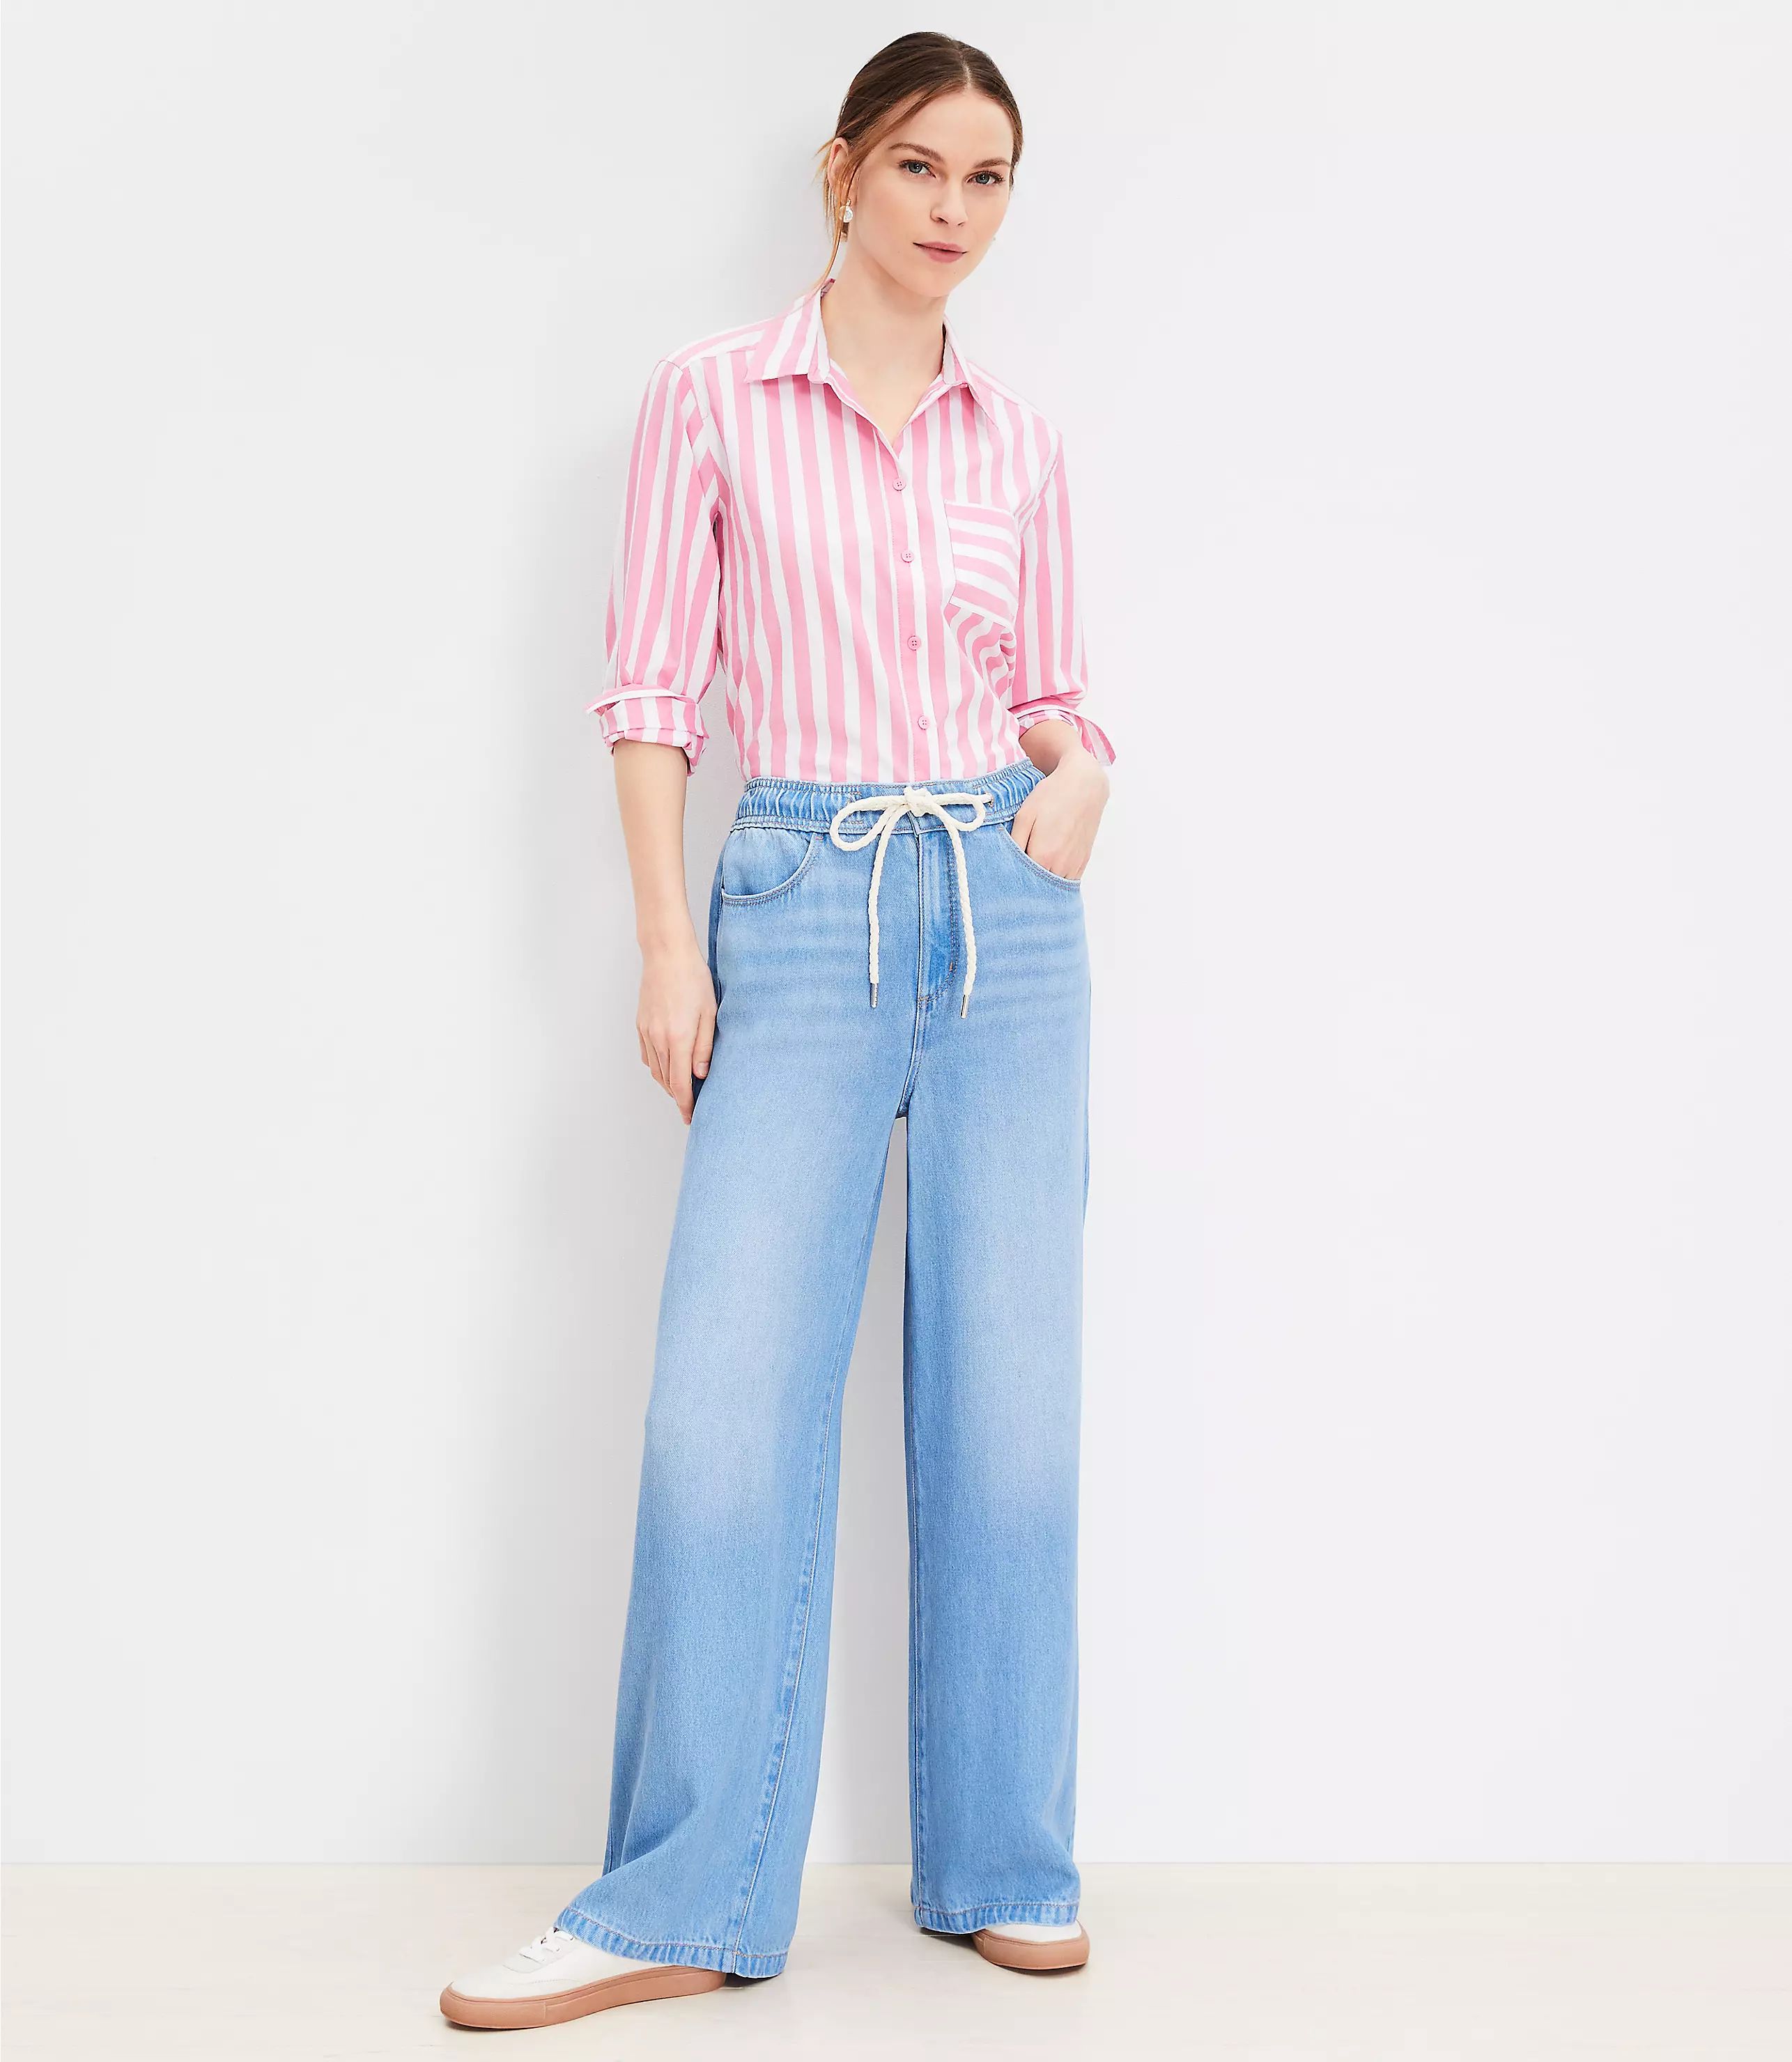 Pull On High Rise Palazzo Jeans in Light Wash | LOFT